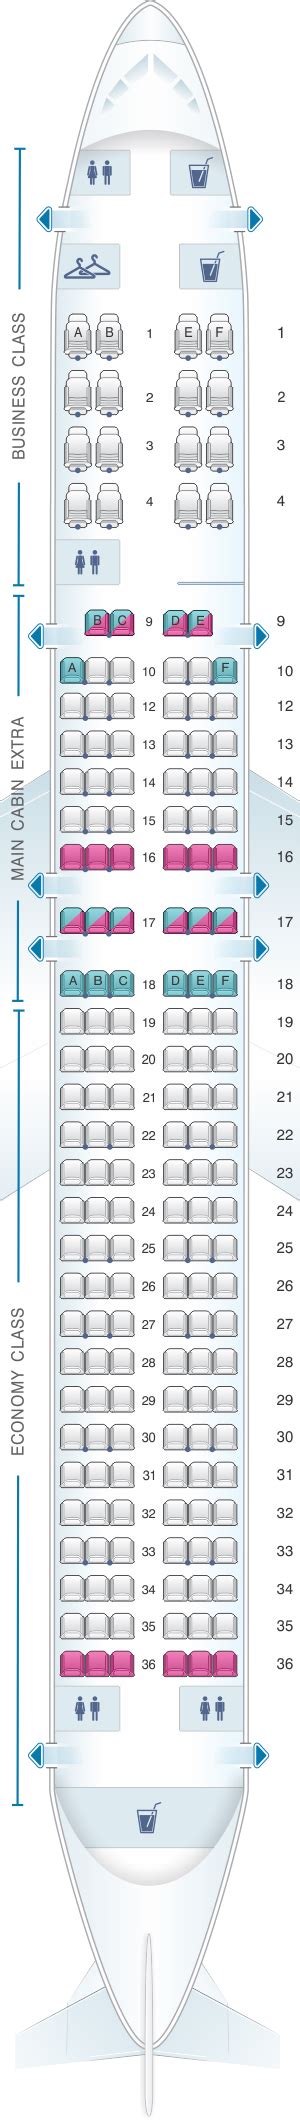 Seat Map American Airlines Boeing B757 200 176pax Seatmaestro